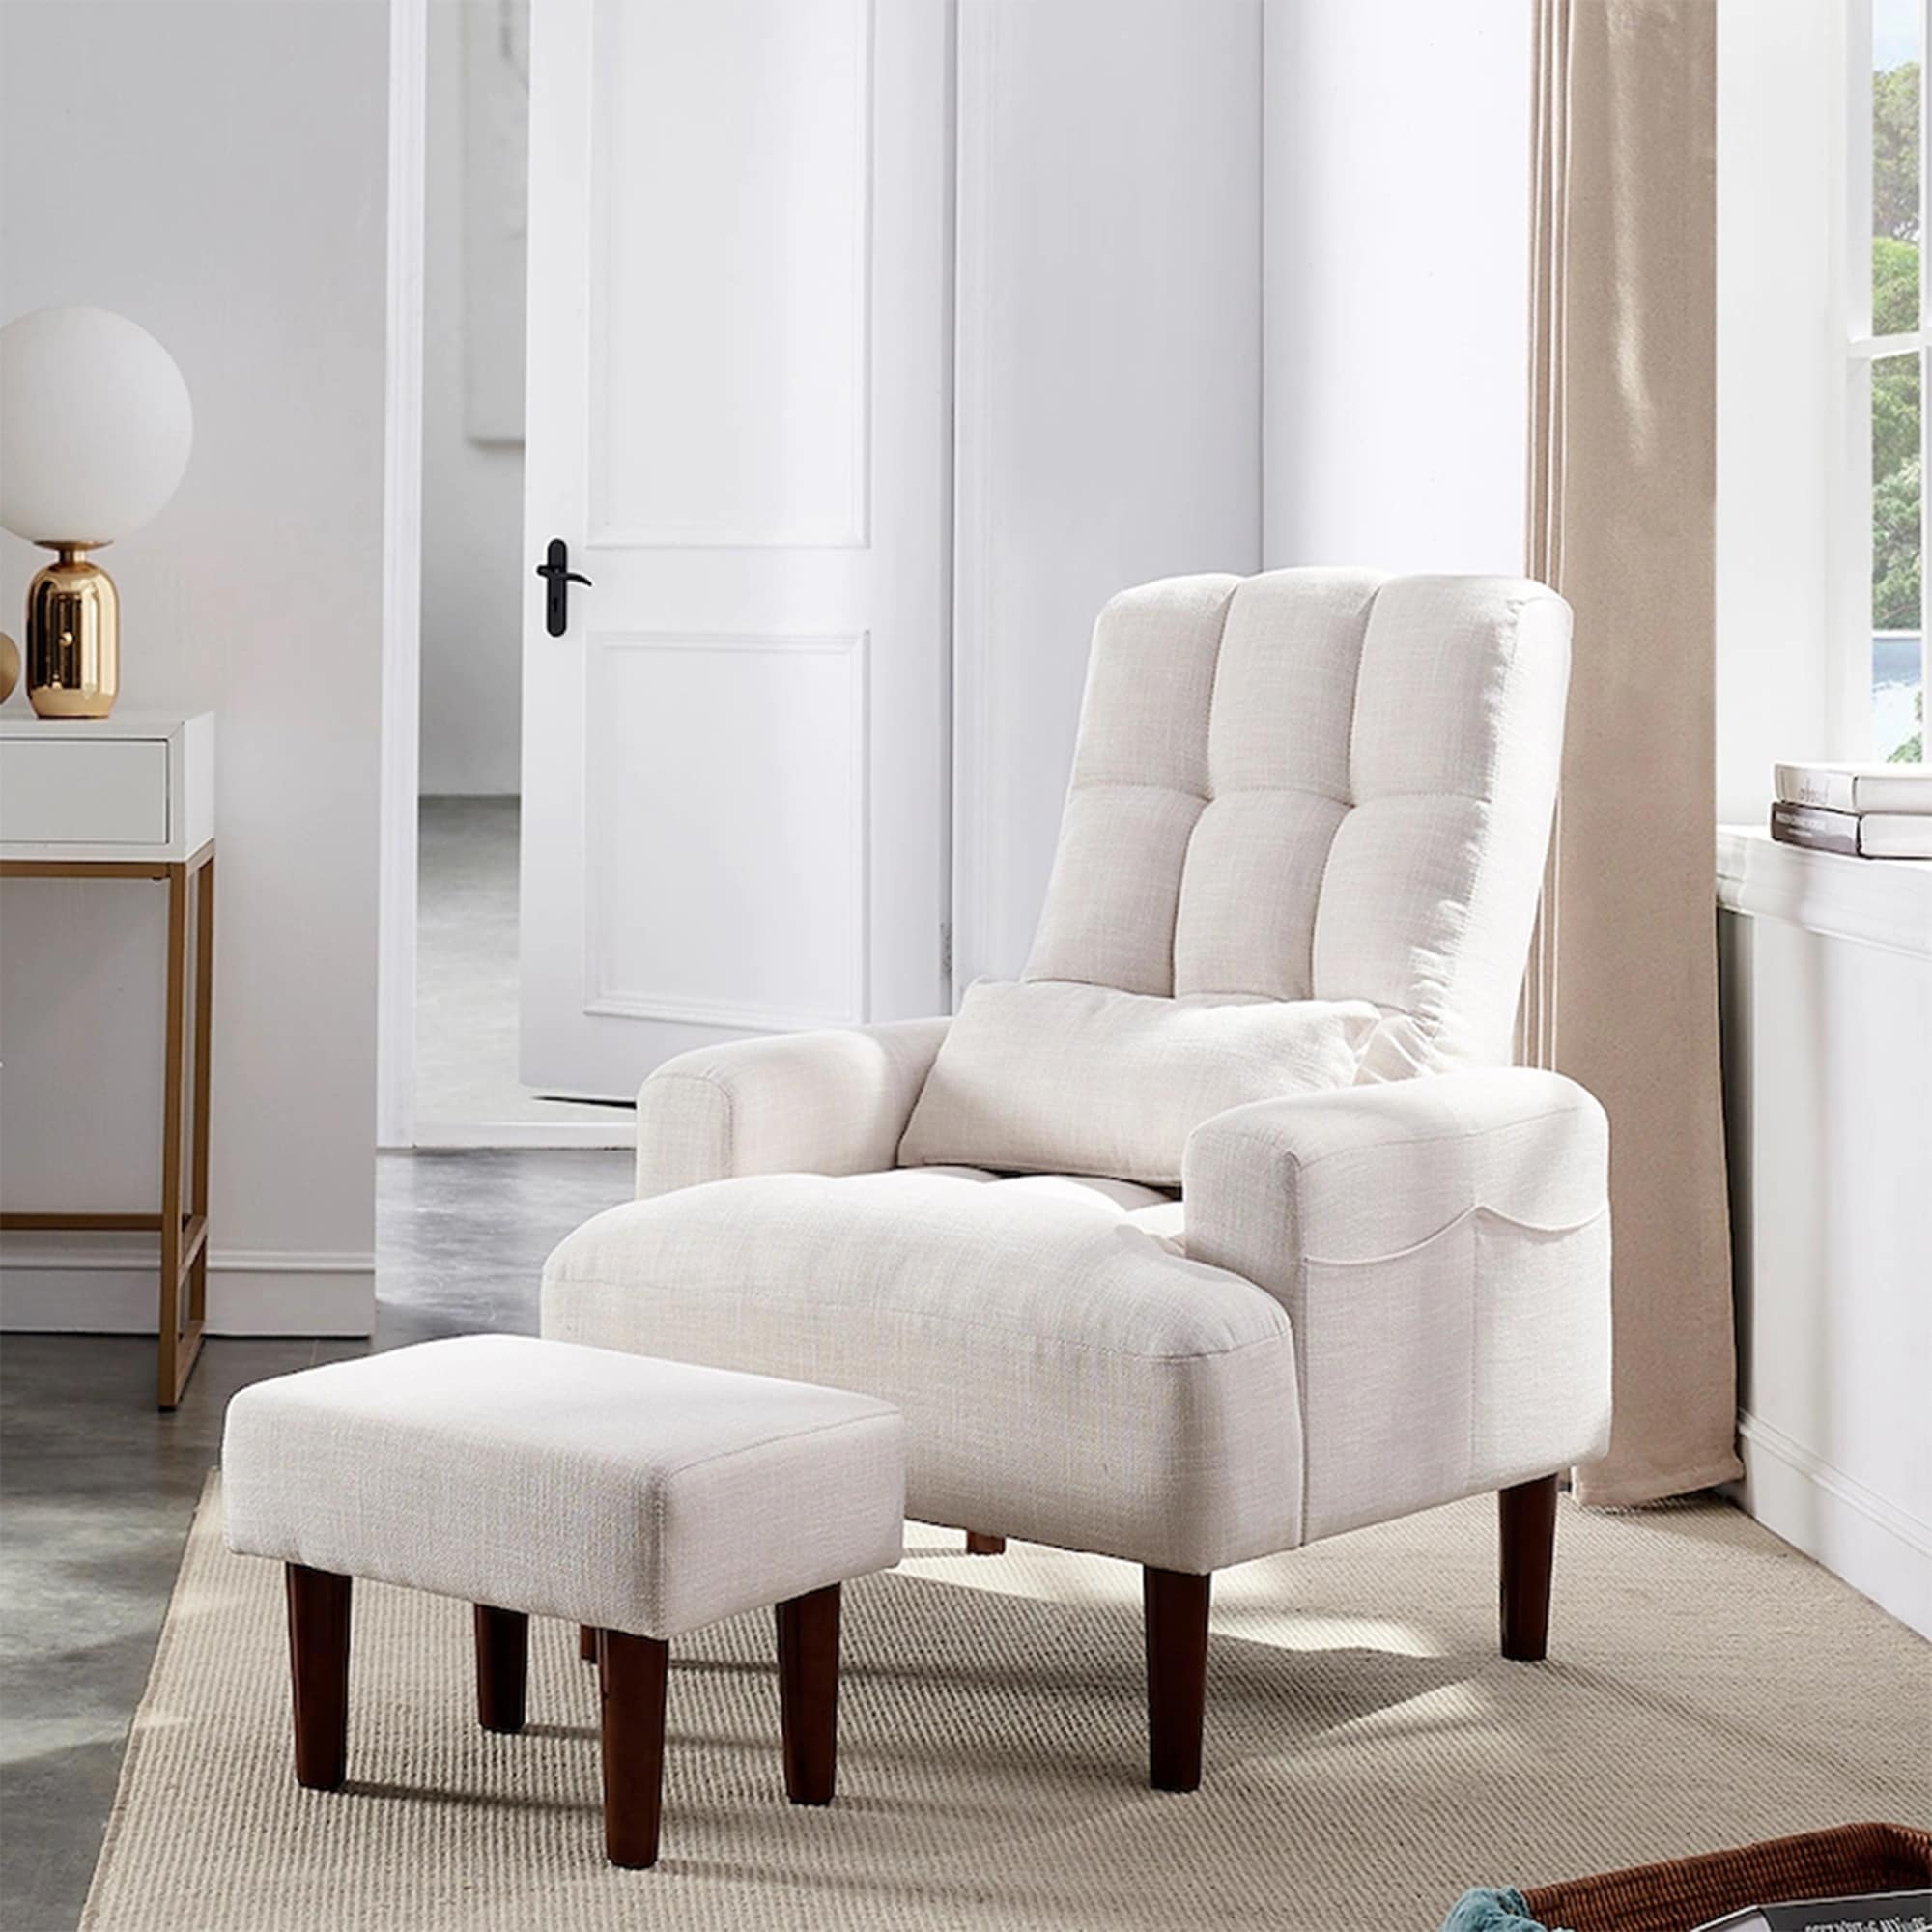 https://ak1.ostkcdn.com/images/products/is/images/direct/86b4aca41ae5978bbd0e5ce3017d3e4eab76276d/Recliner-Chair-with-Ottoman%2C-lumbar-pillow-and-Side-Pocket%2C-Fabric-Tufted-Cushion-Back.jpg